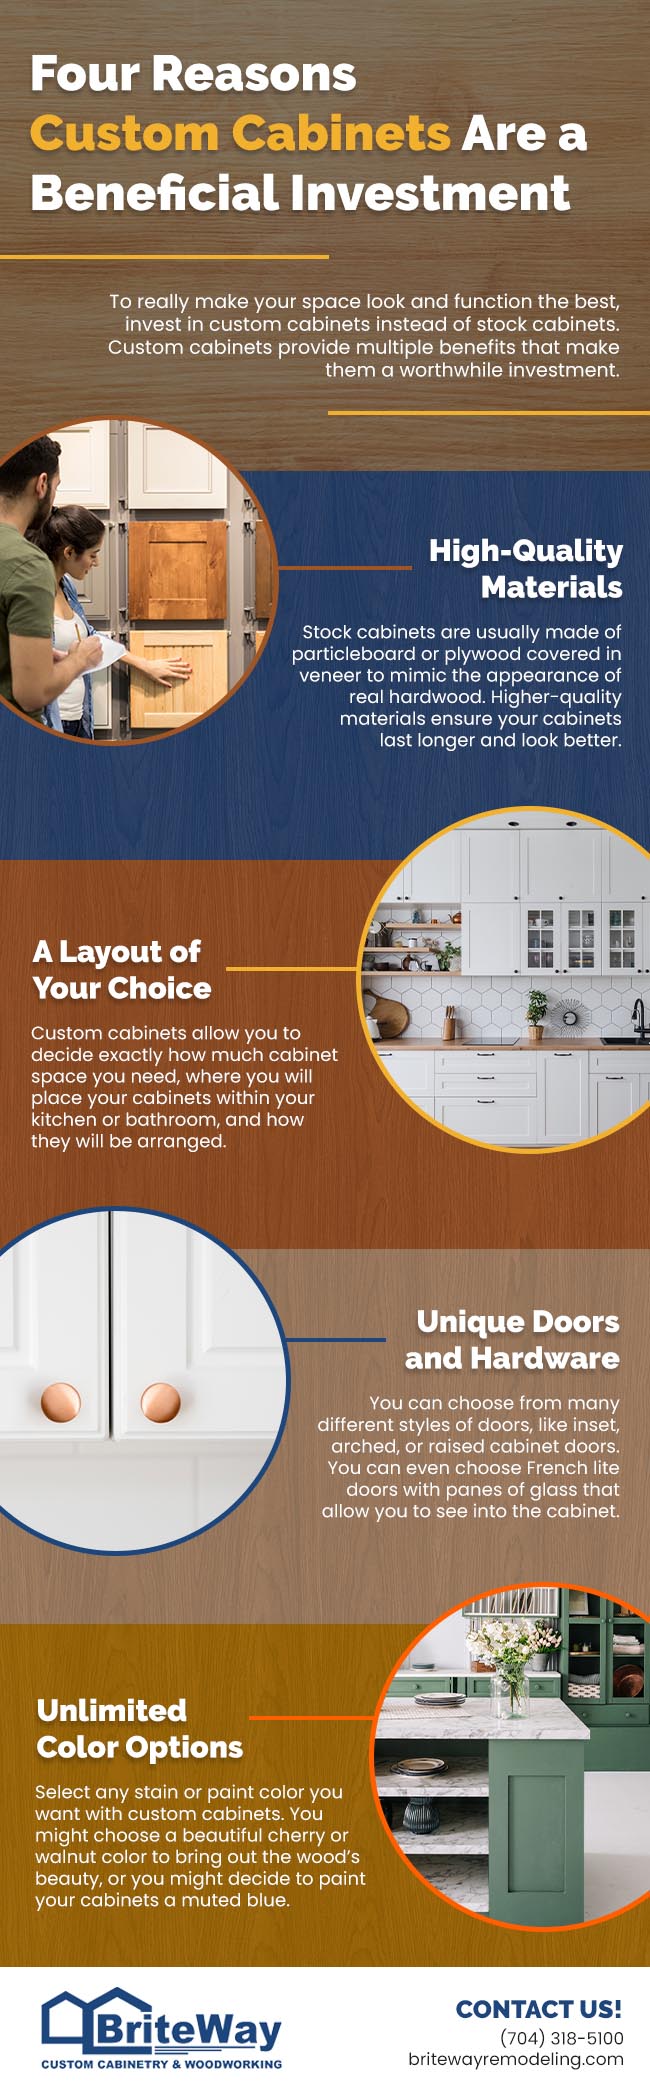 Four Reasons Custom Cabinets Are a Beneficial Investment 